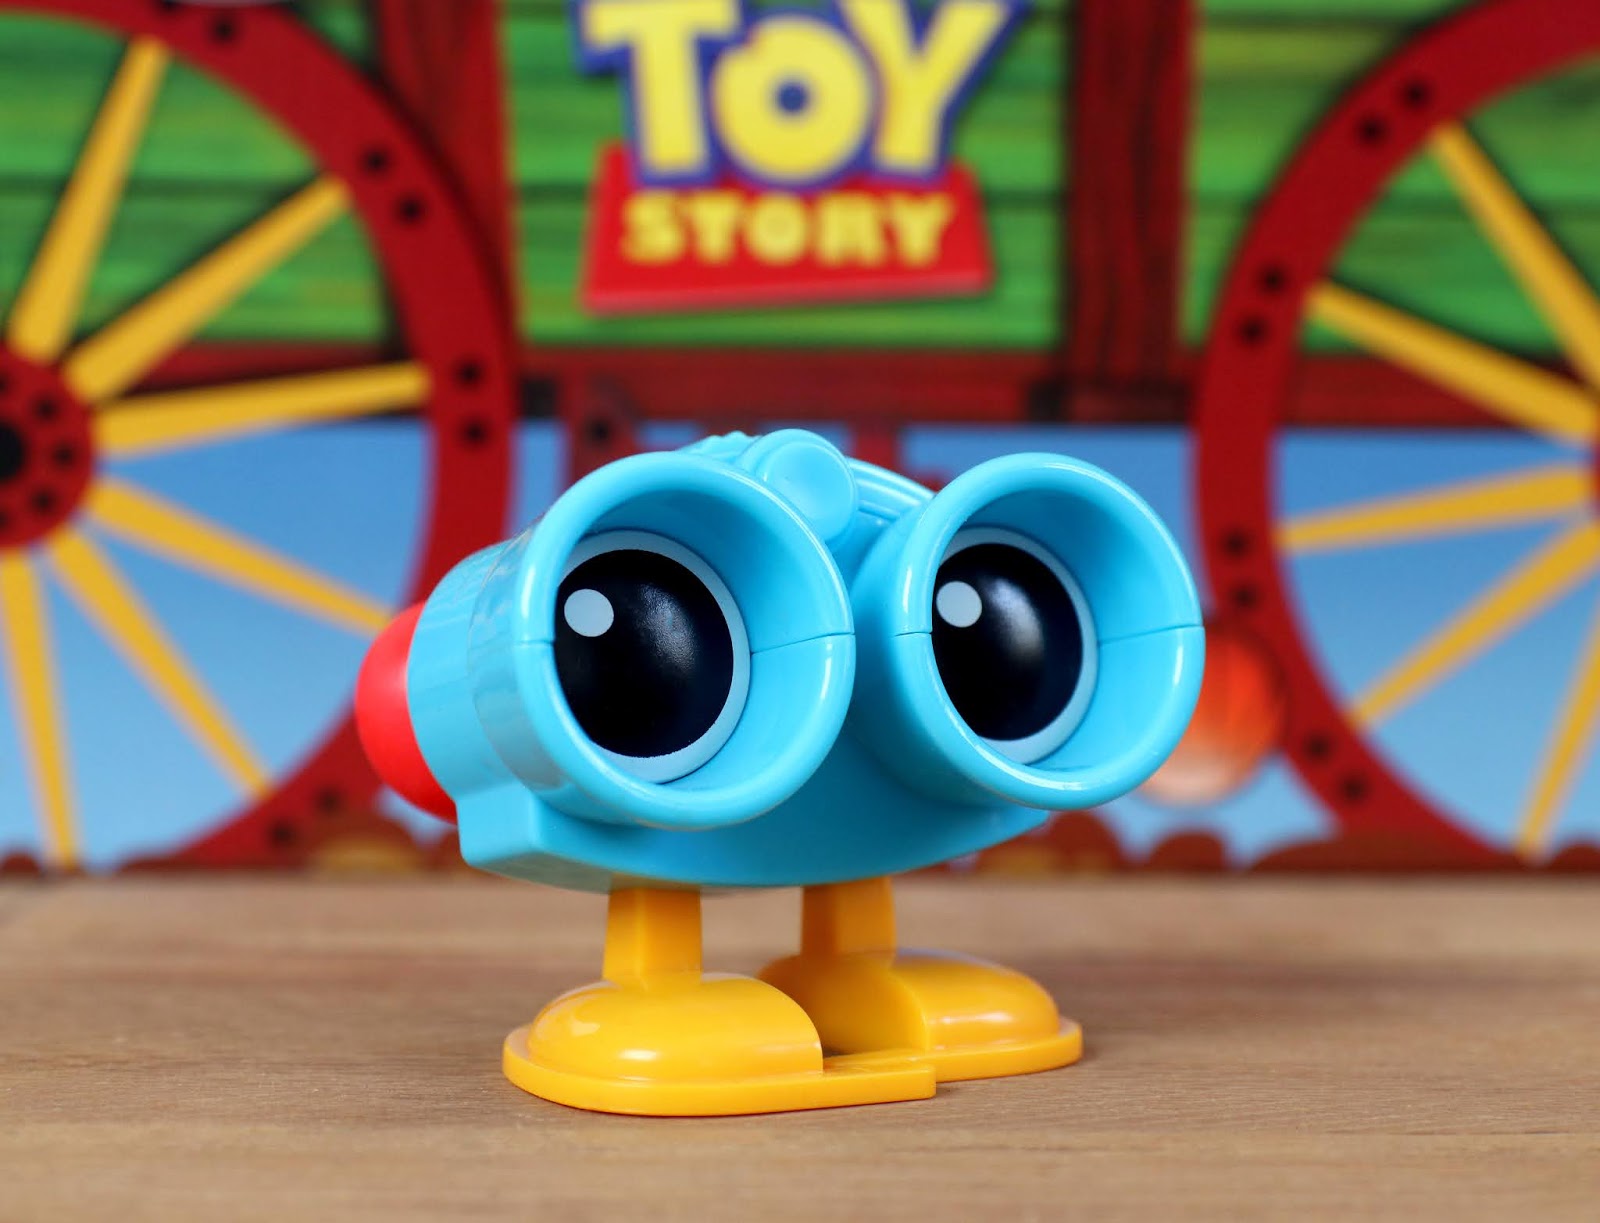 andy's toy chest figures mattel review